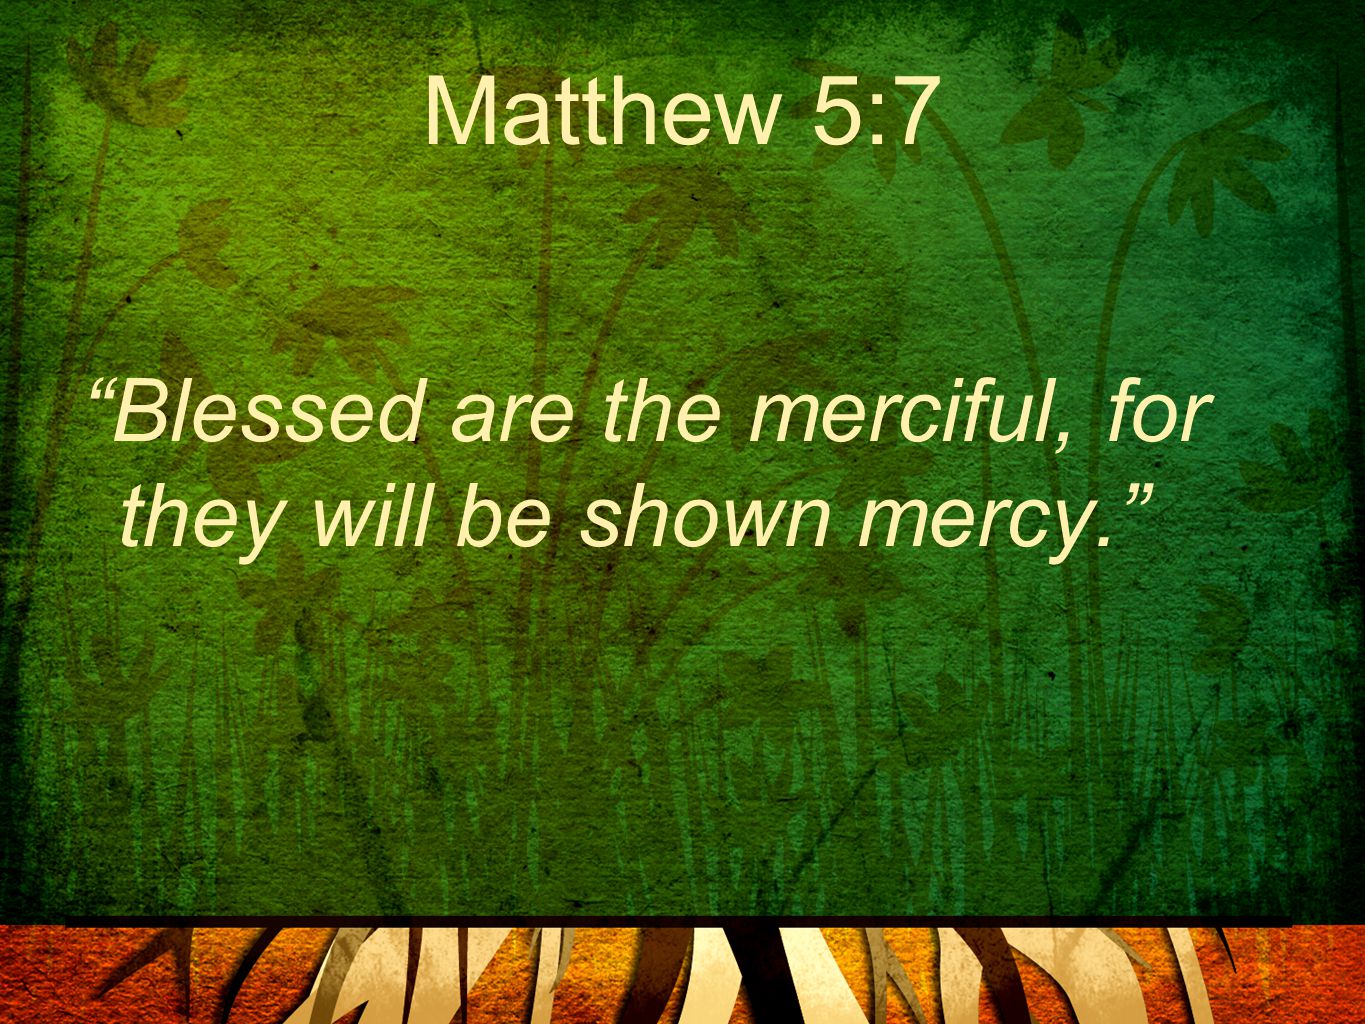 Matthew 5:7 Blessed are the merciful, for they will be shown mercy.